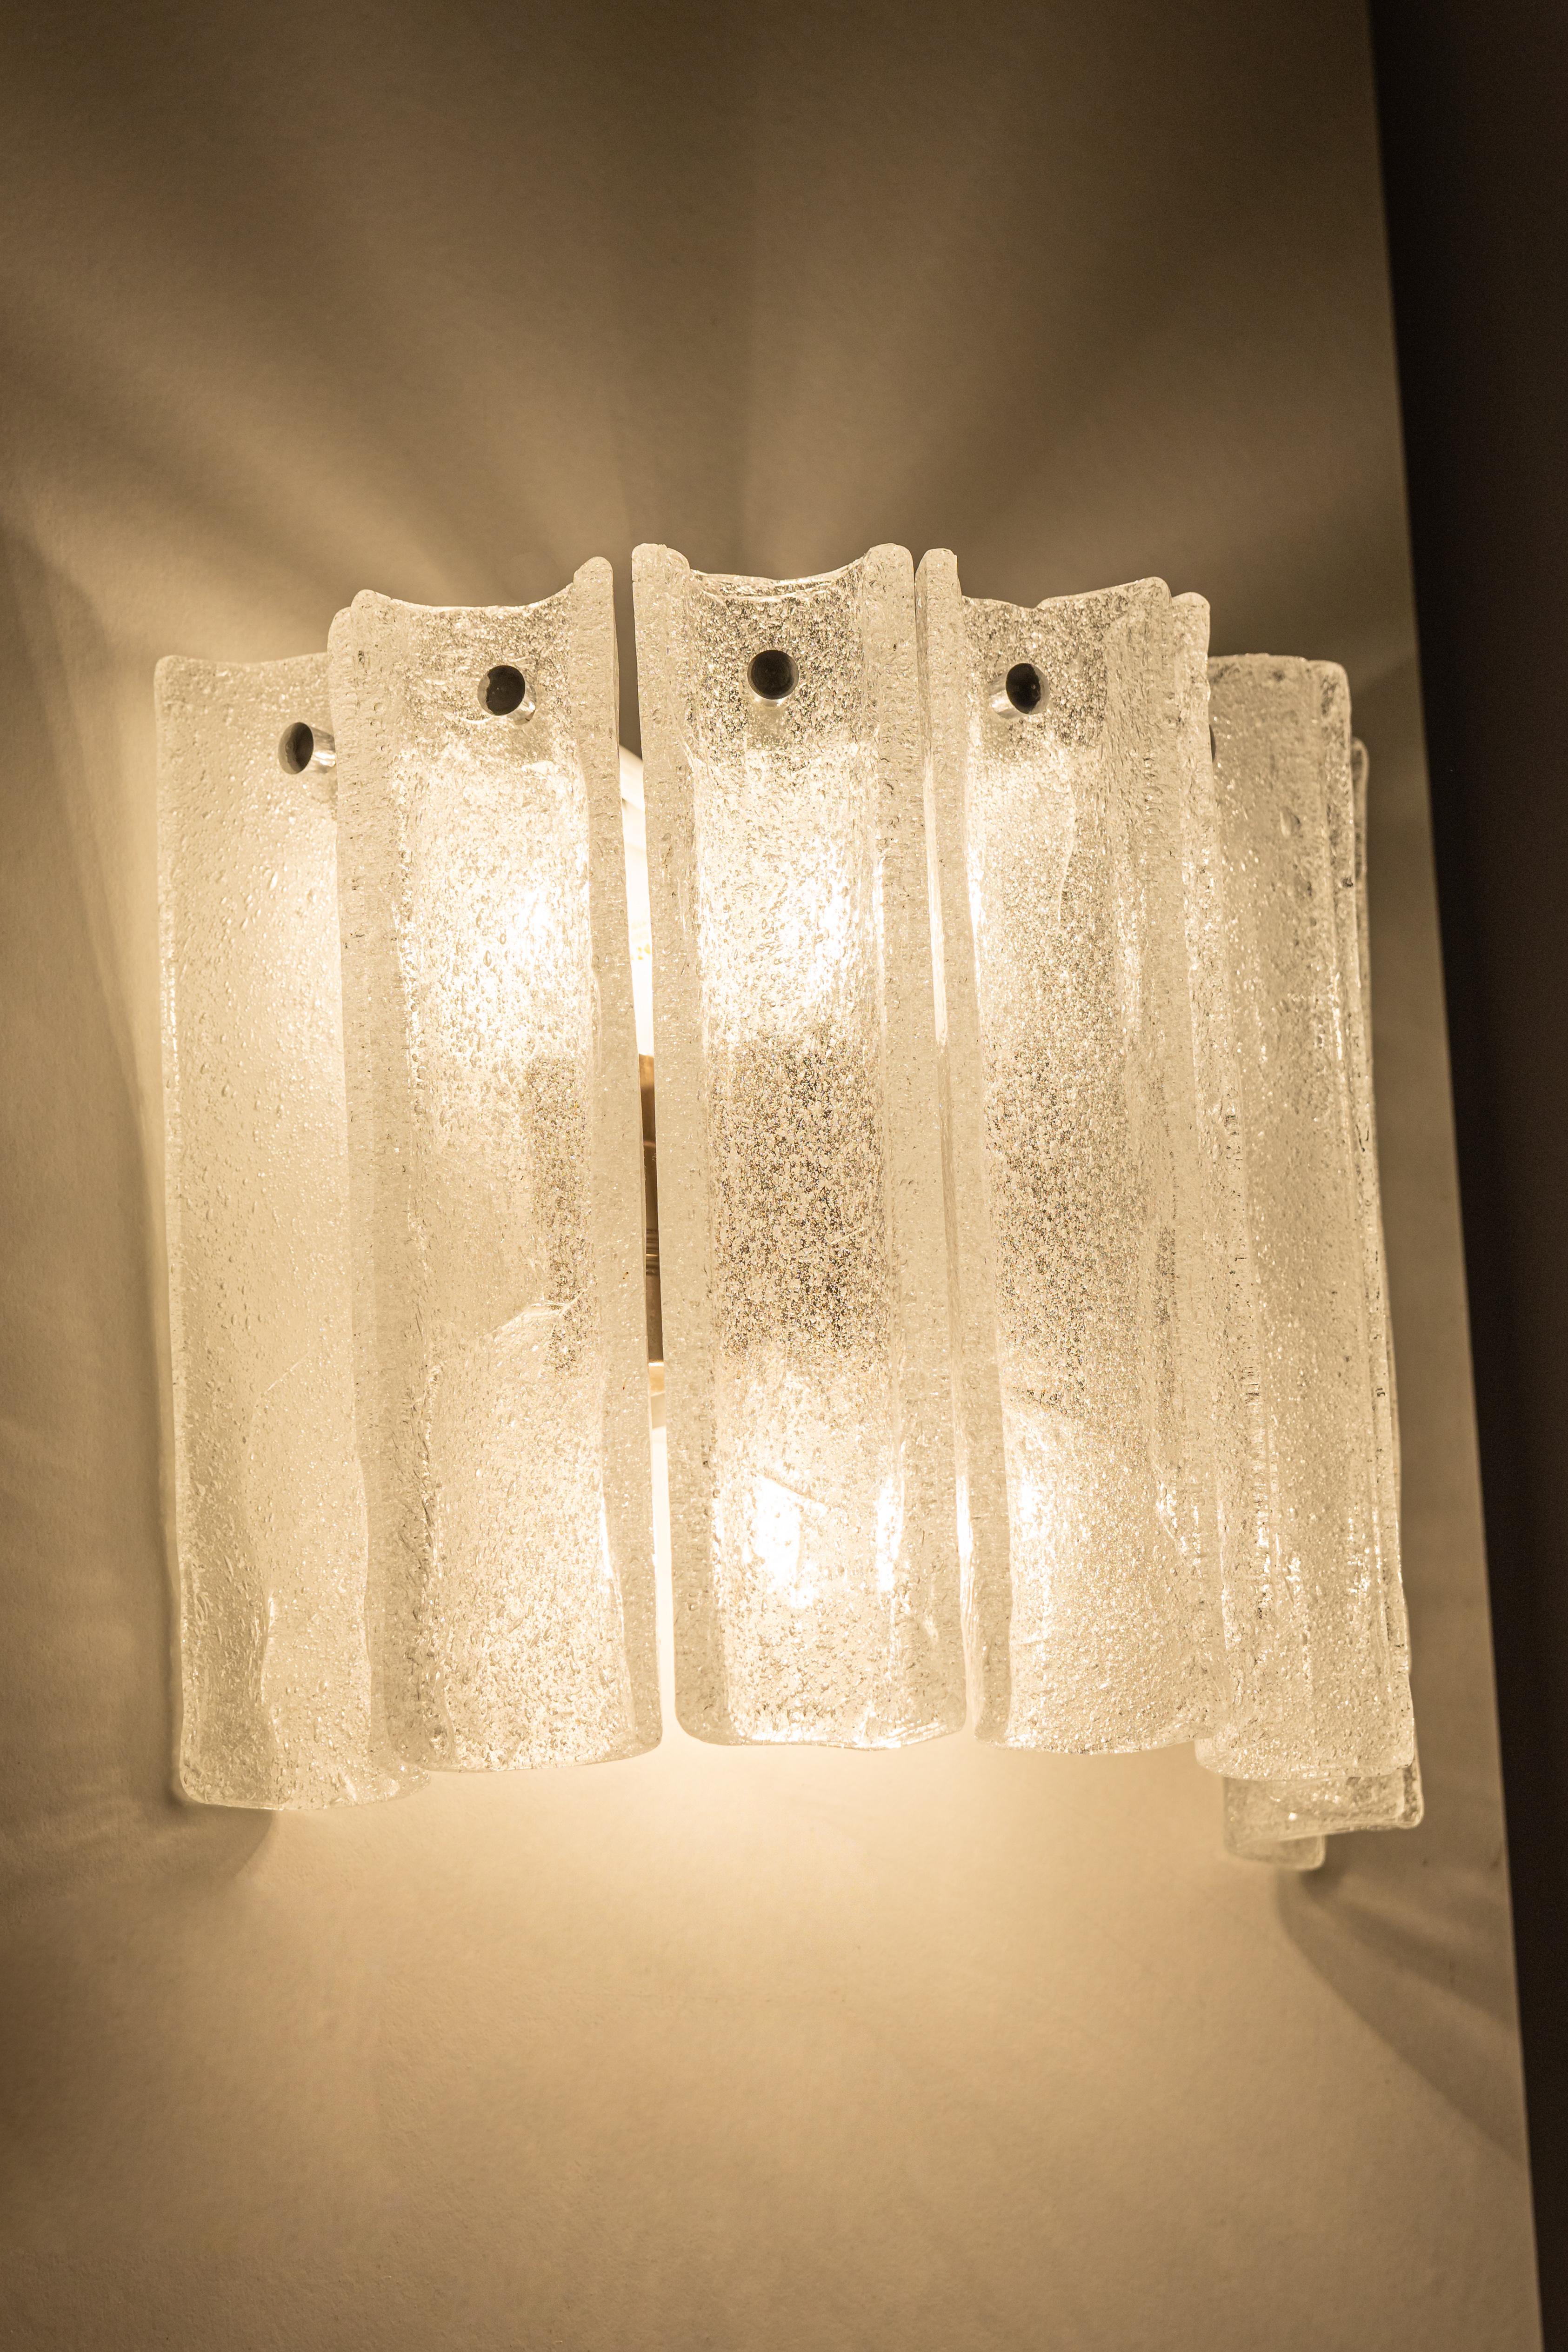 Wonderful mid-century wall sconce with ice glass, made by Kalmar, Austria, manufactured, circa 1960-1969.
High quality and in very good condition. Cleaned, well-wired and ready to use.  

The fixture requires 5 x E14 Small bulbs with 40W max each